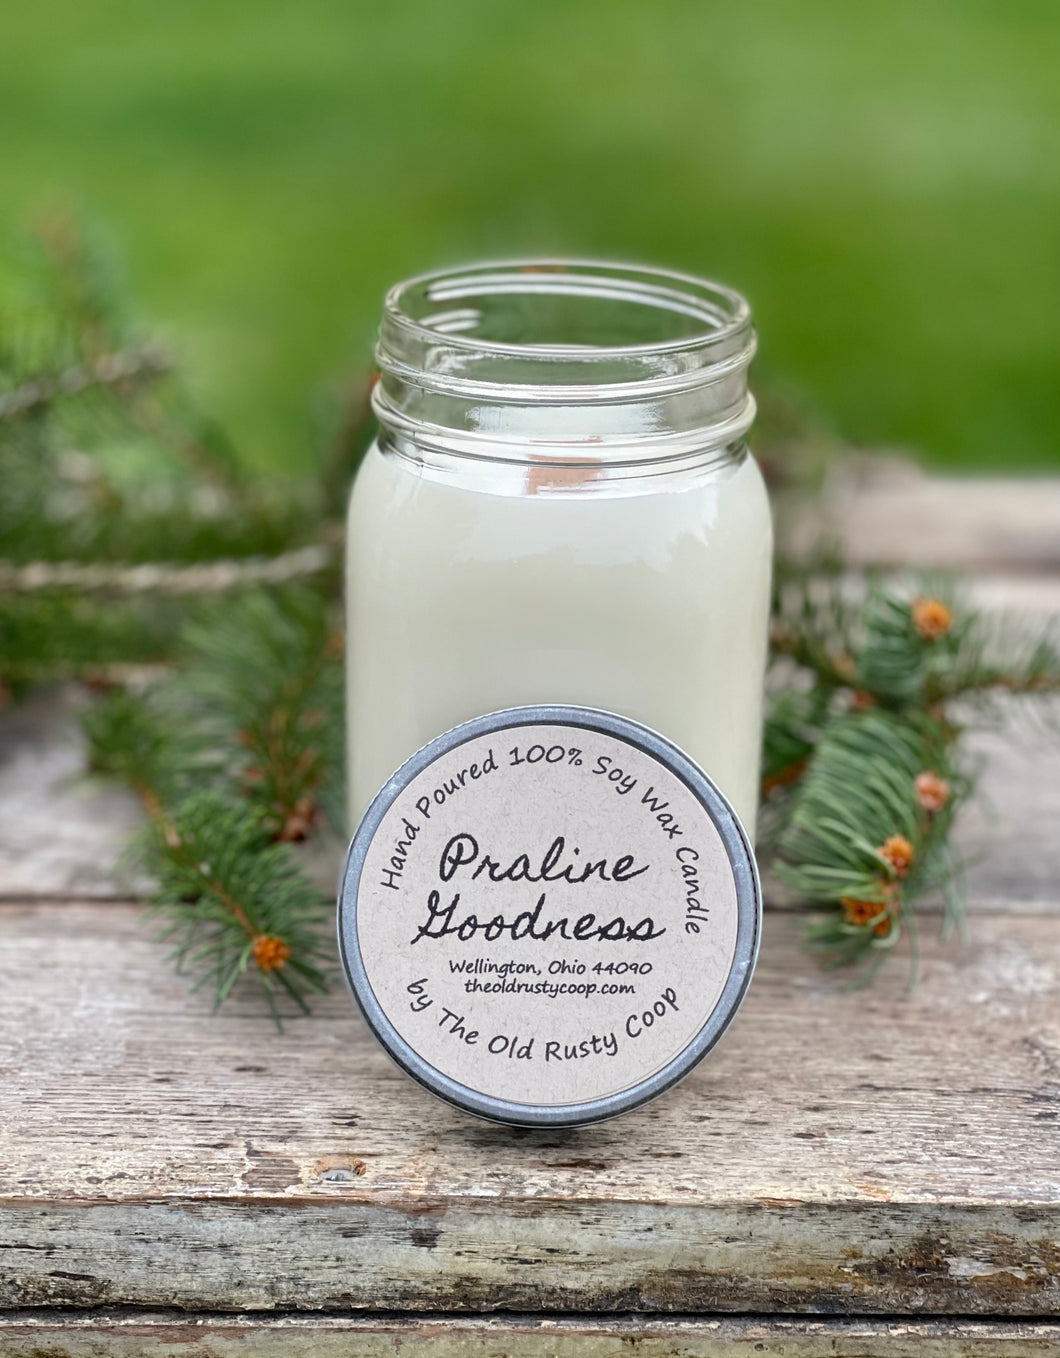 Praline Goodness~ Hand Poured 100% Soy Wax Wooden Wick Candle